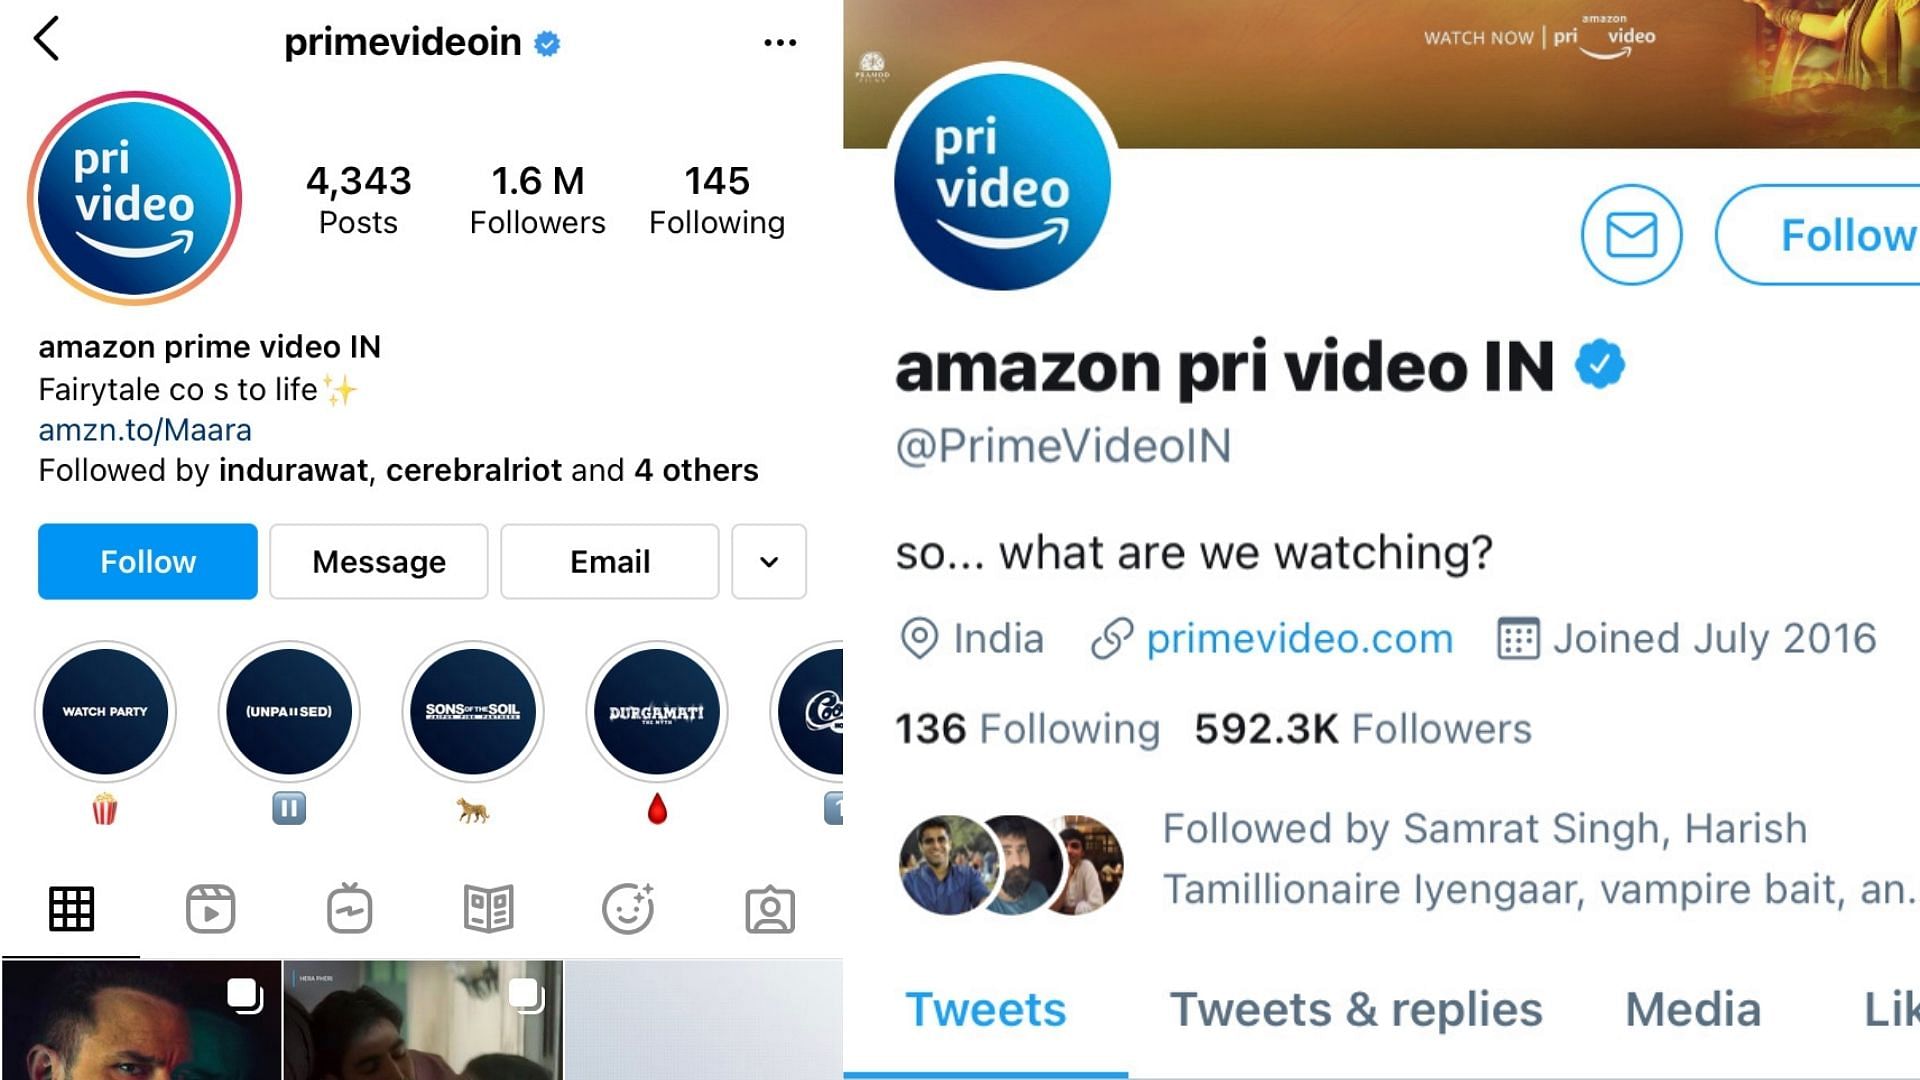 Where Did Me From The Amazon Prime Video Logo Vanish